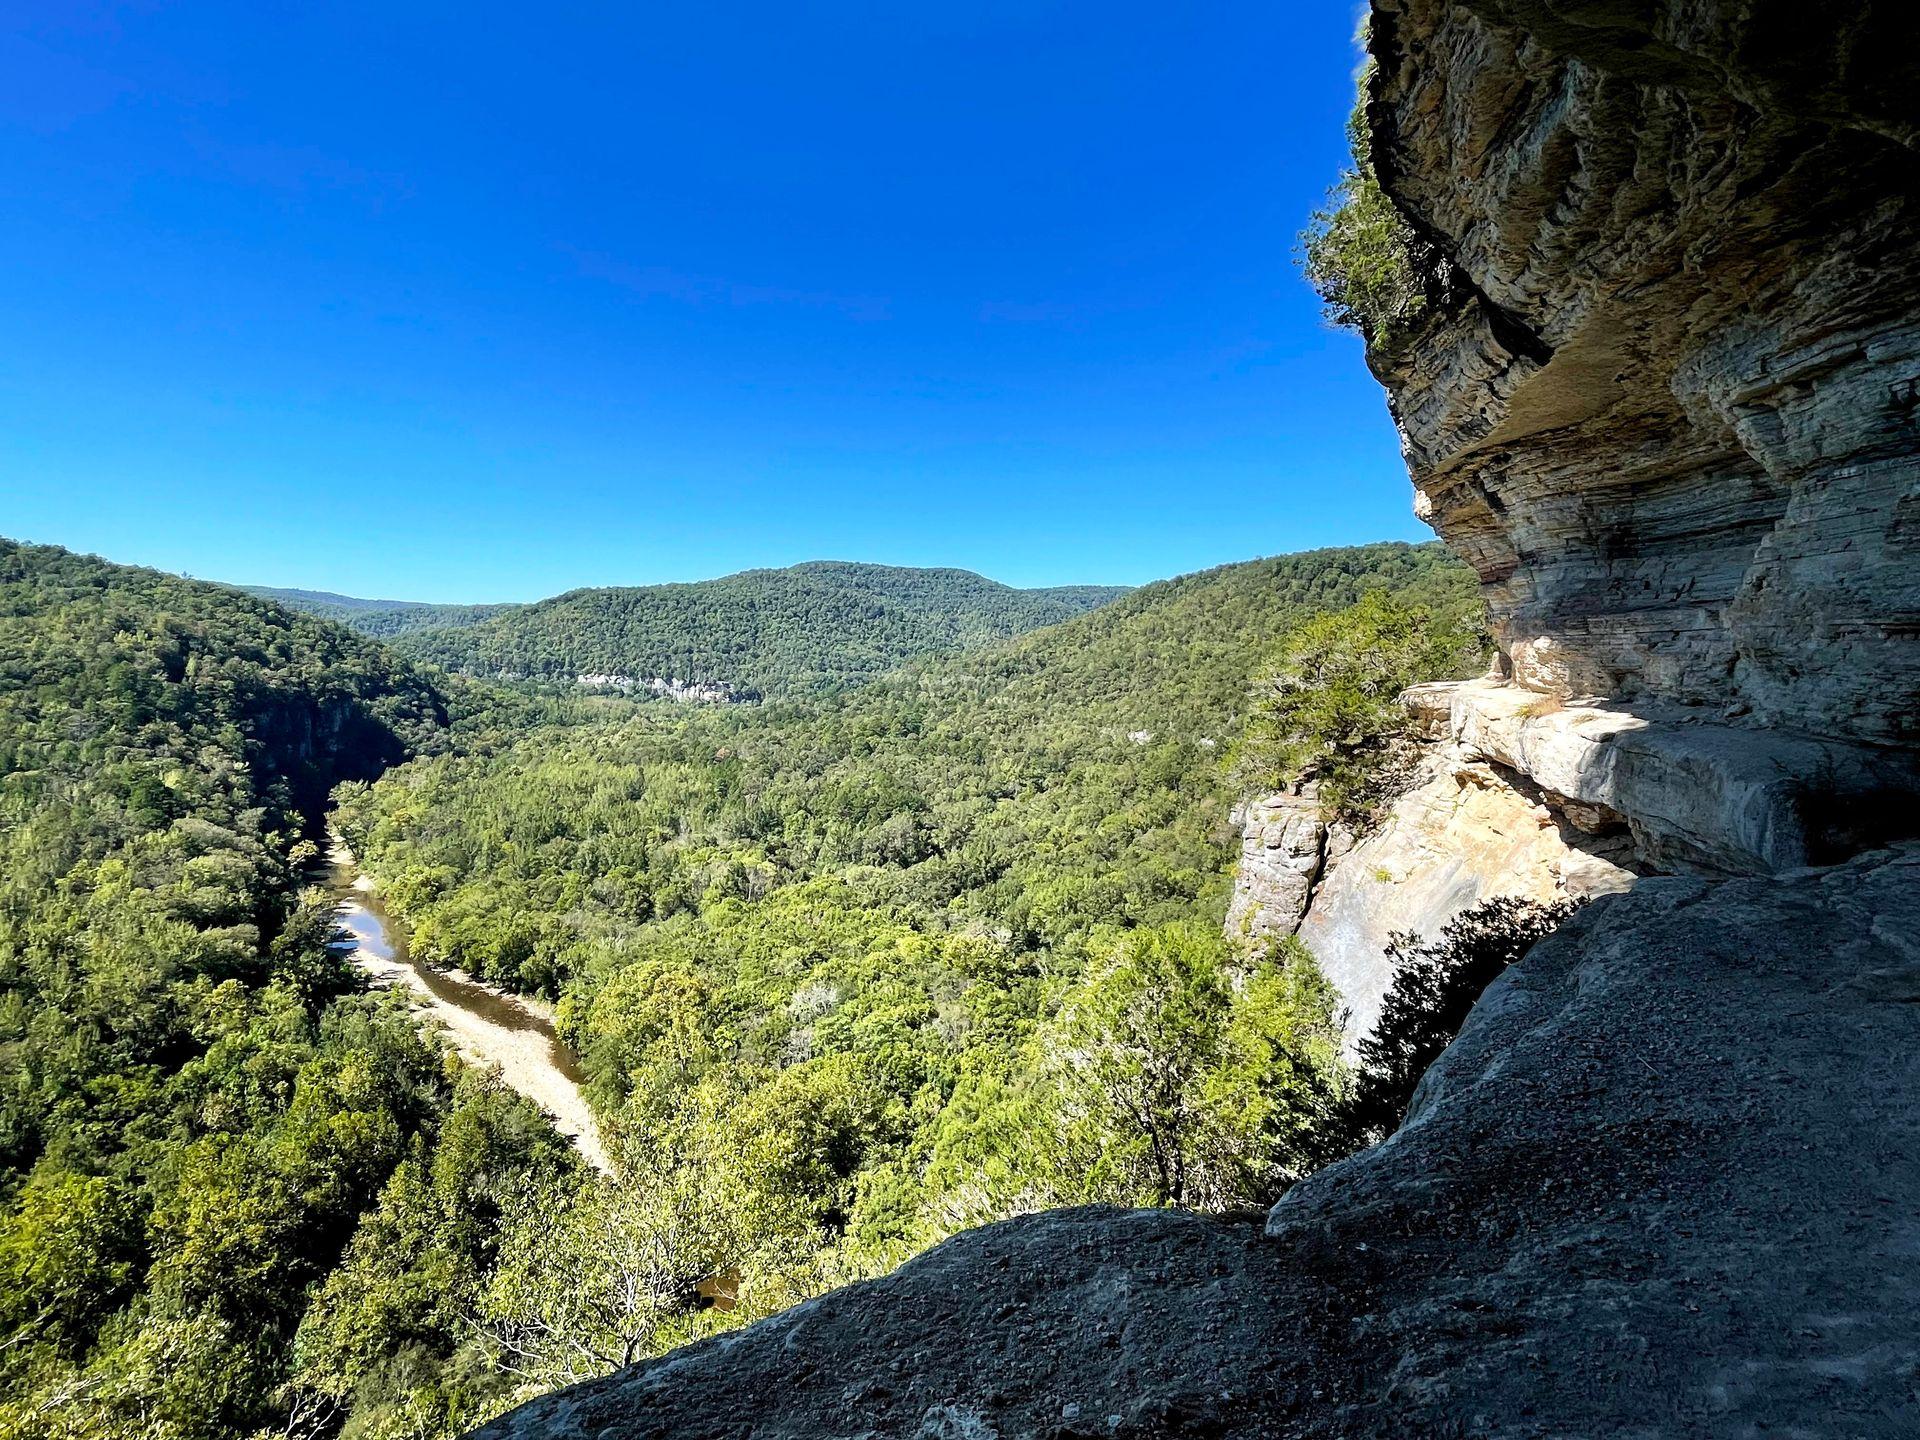 Cliffs at the Buffalo National River on the Centerpoint to Goat Trail.